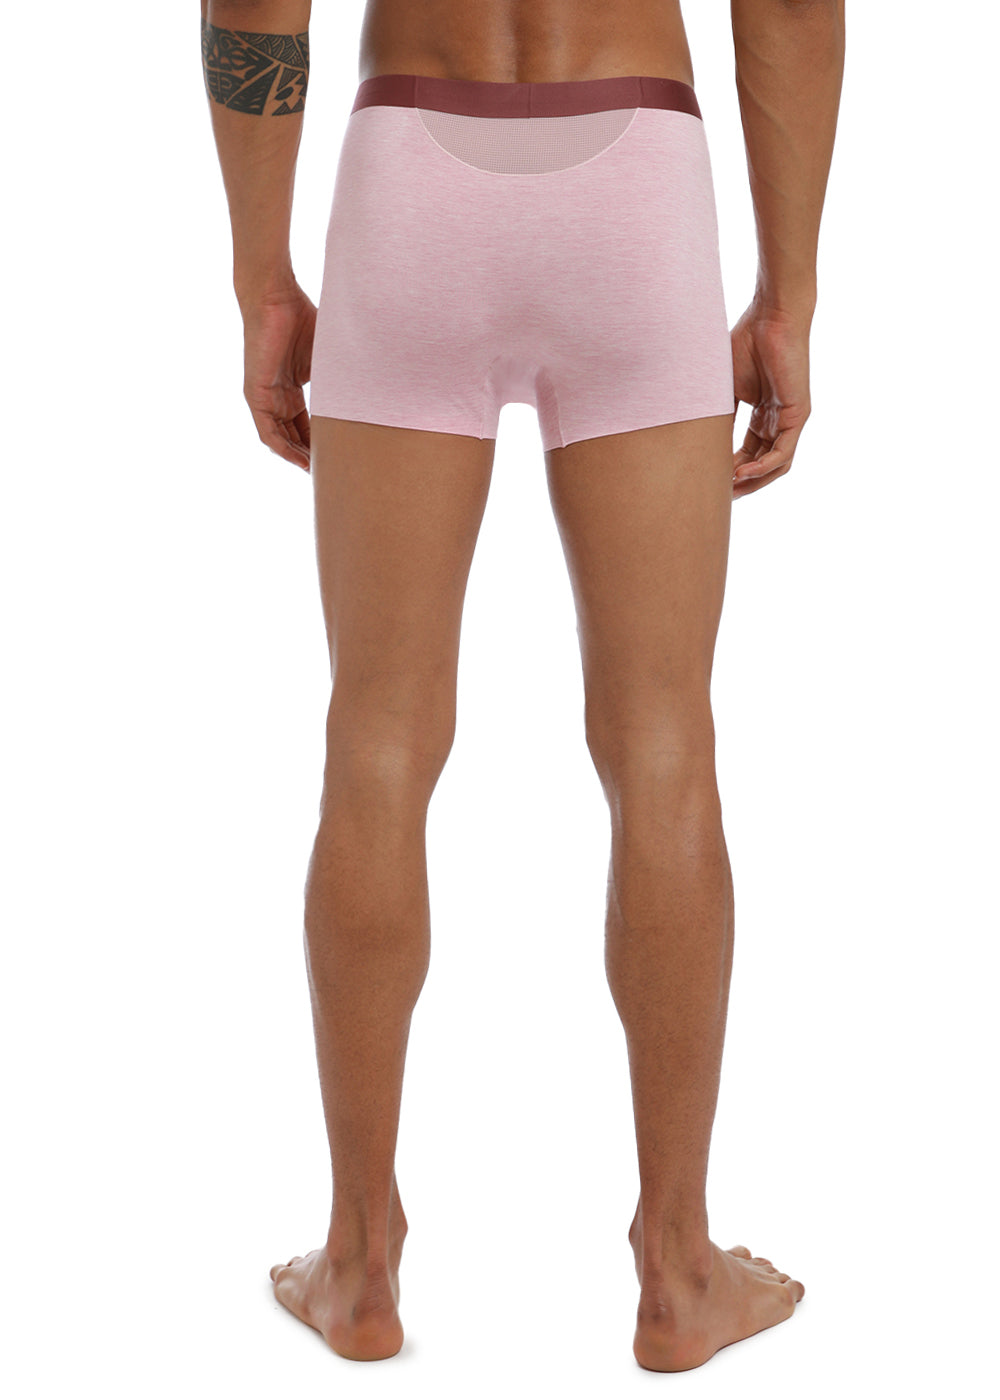 Shell pink low rise trunk